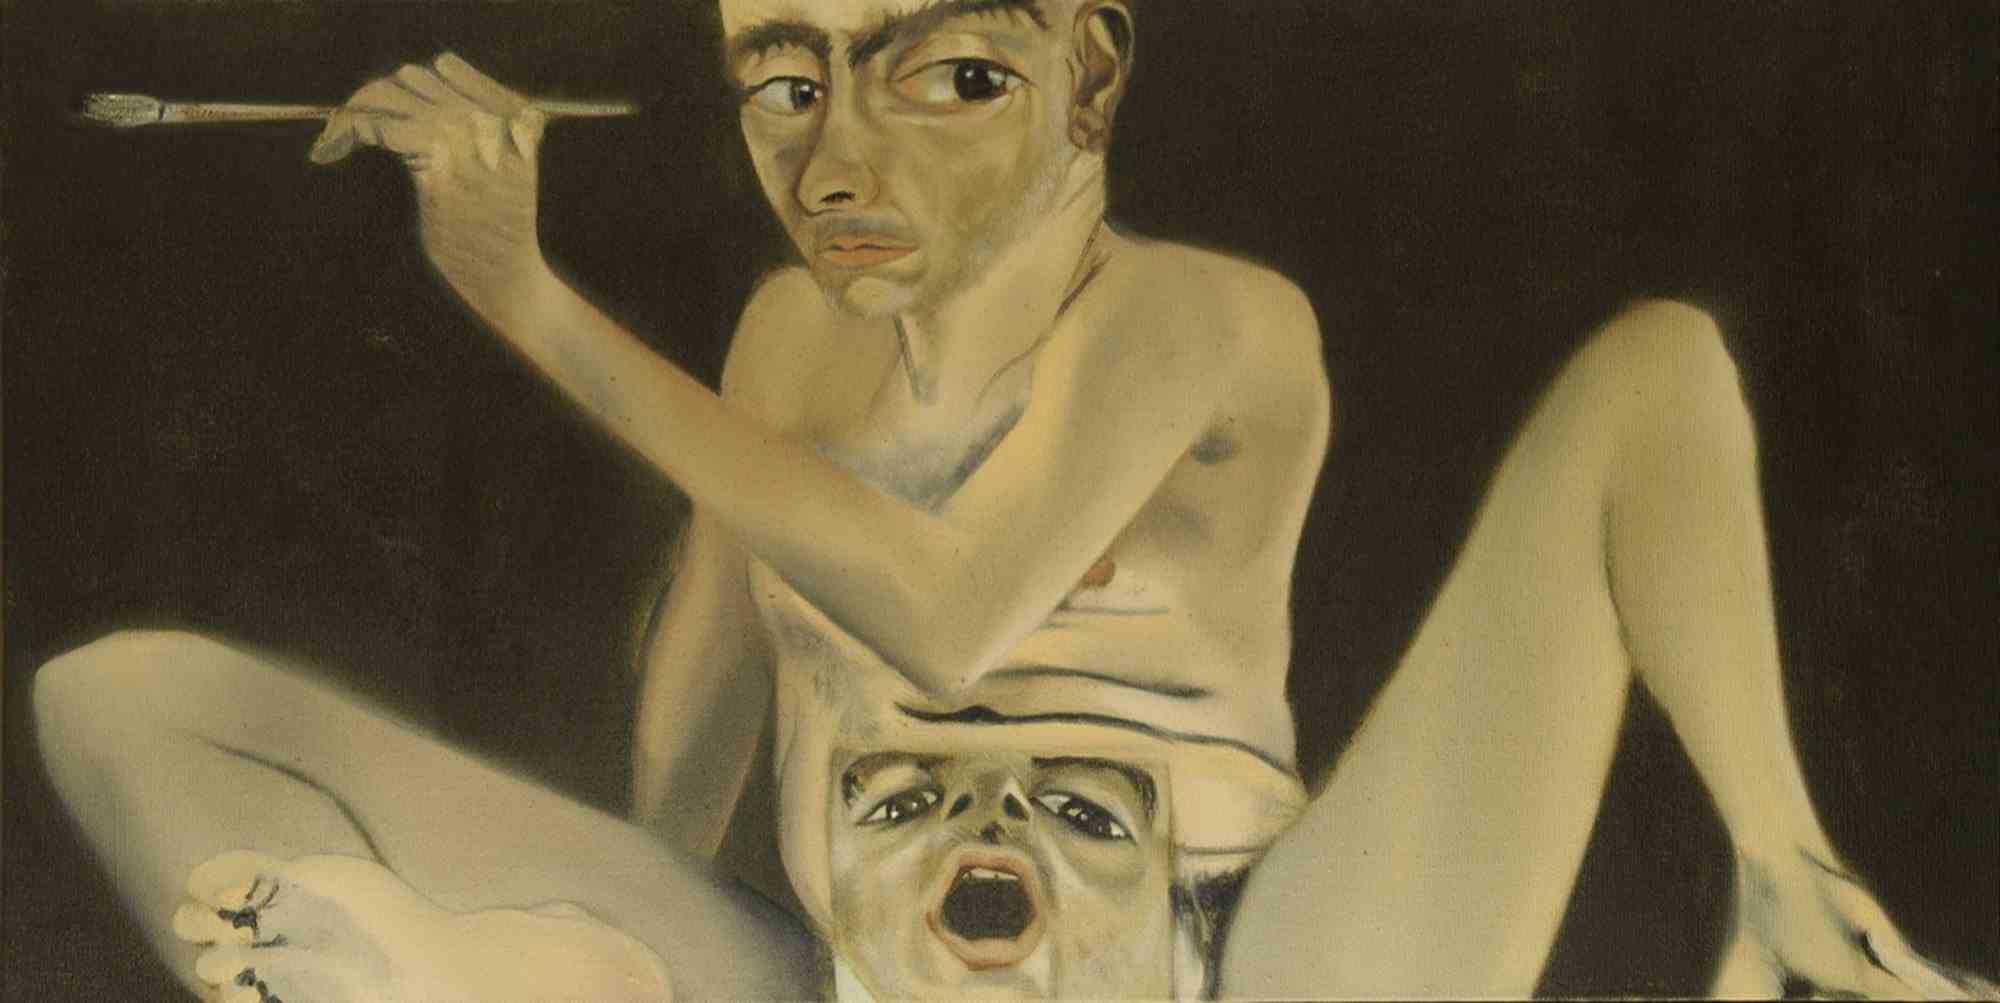 Self-Portrait with Mouth Open